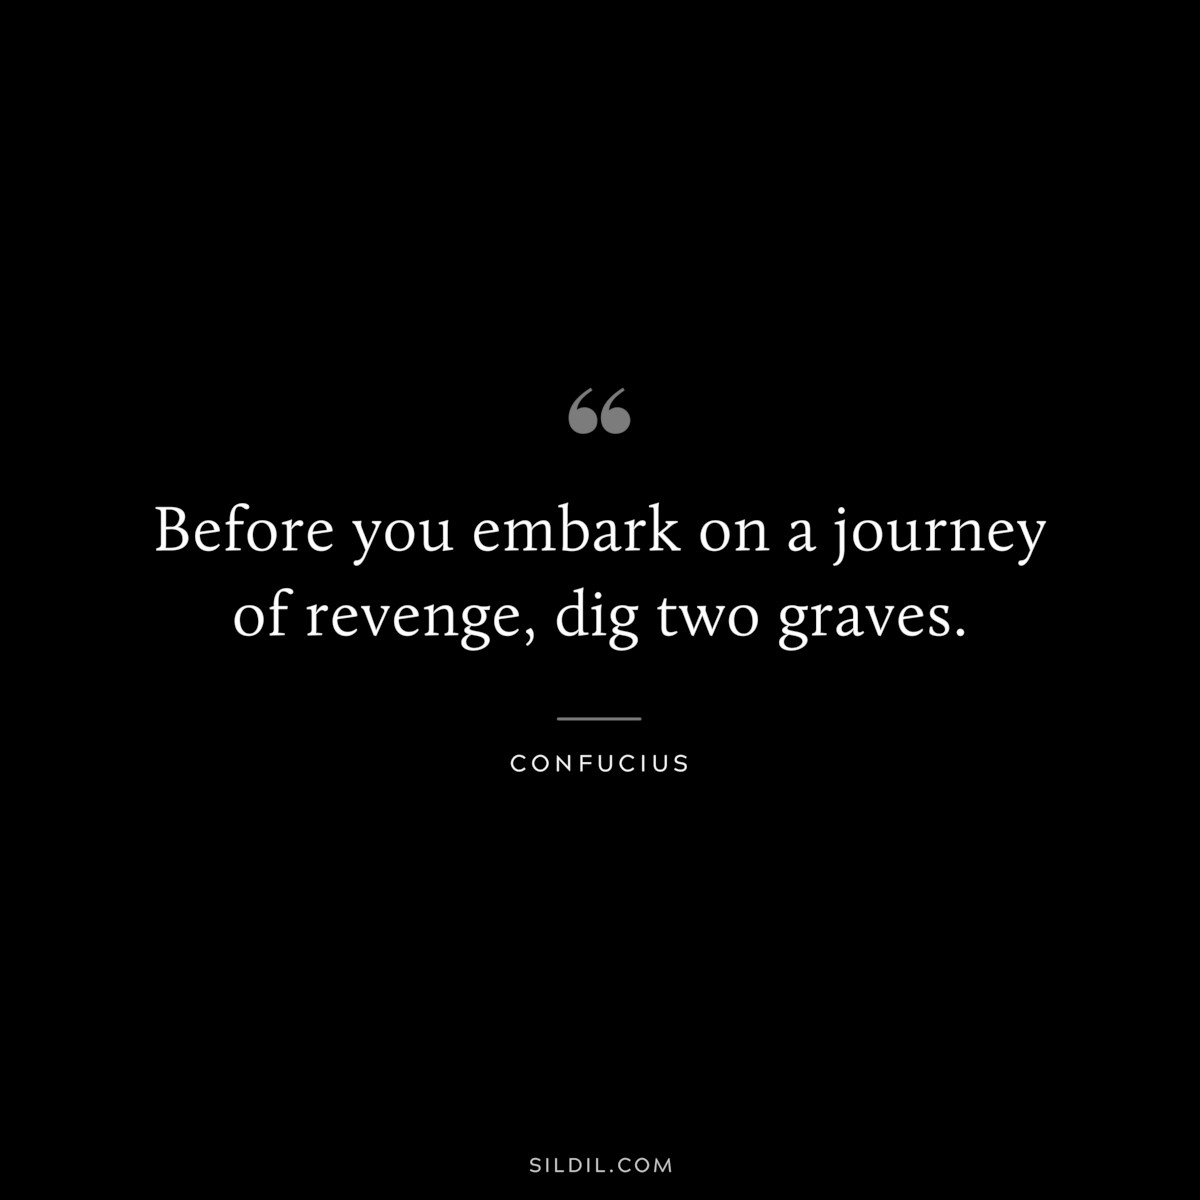 Before you embark on a journey of revenge, dig two graves. ― Confucius